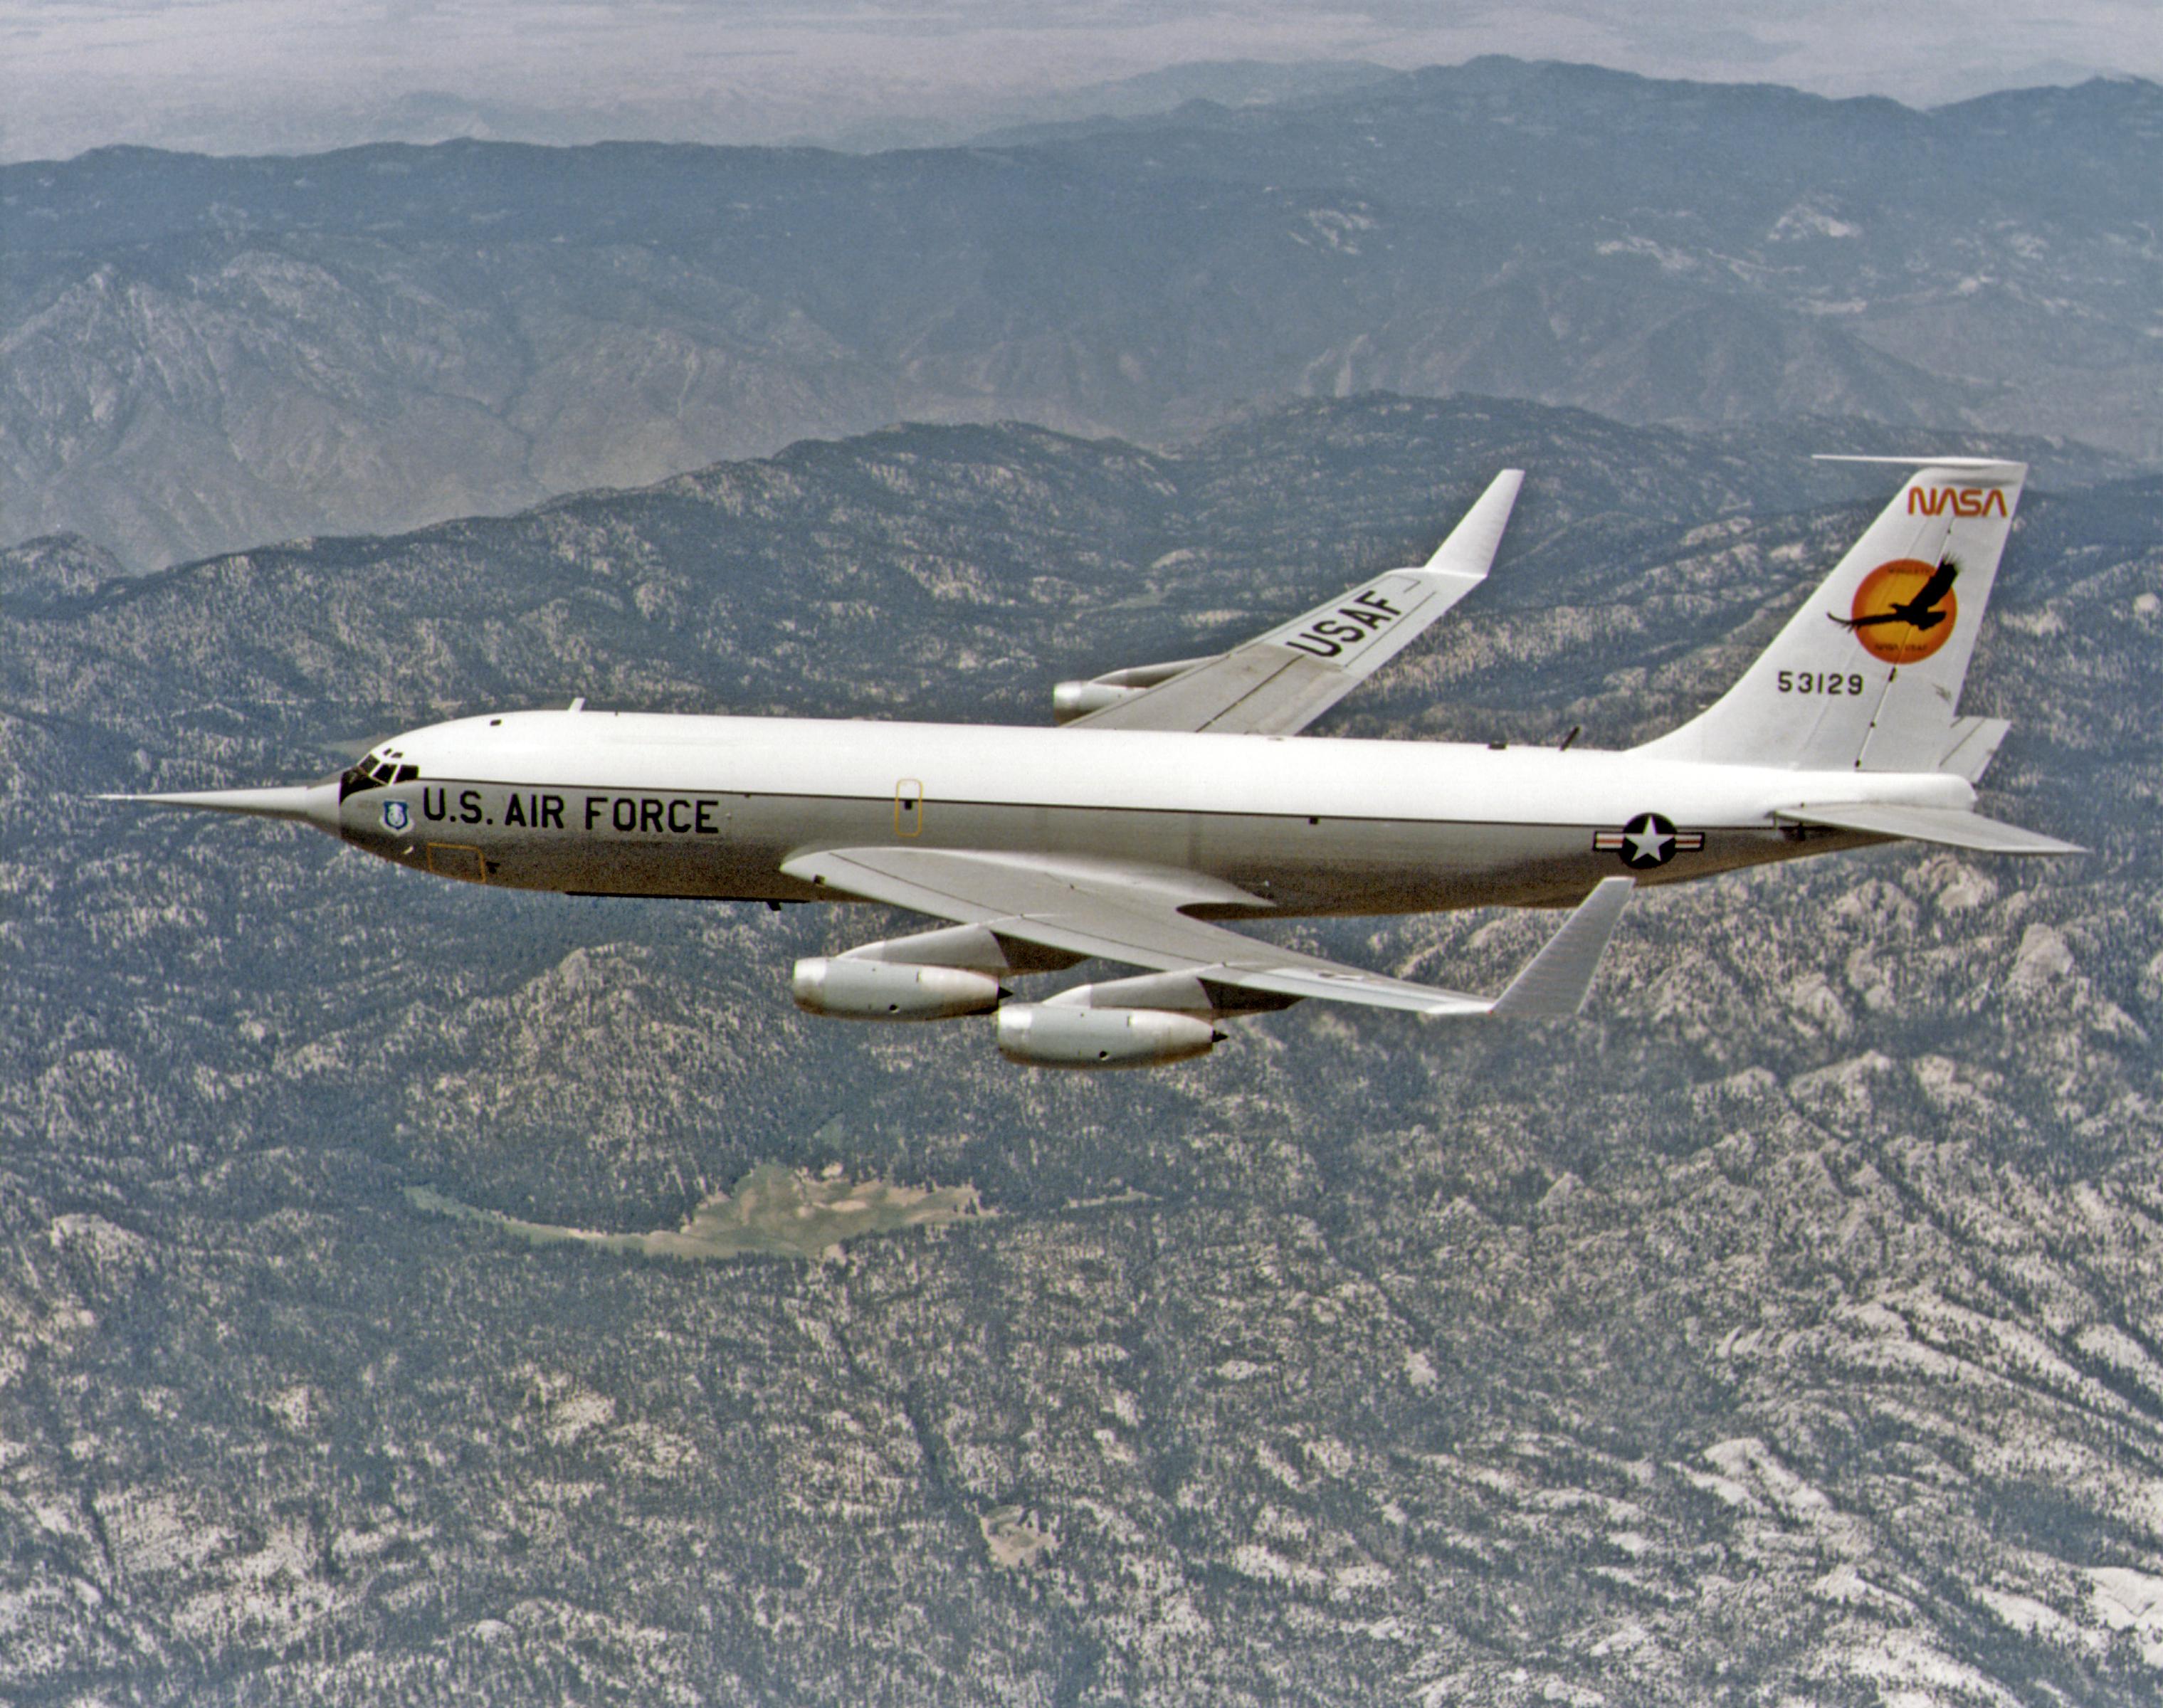 The development of the winglet made airplanes much more efficient, reducing operating costs and carbon dioxide emissions. After NASA Dryden’s flight tests with a KC-135, the design soon became common across the air industry. Credit: NASA